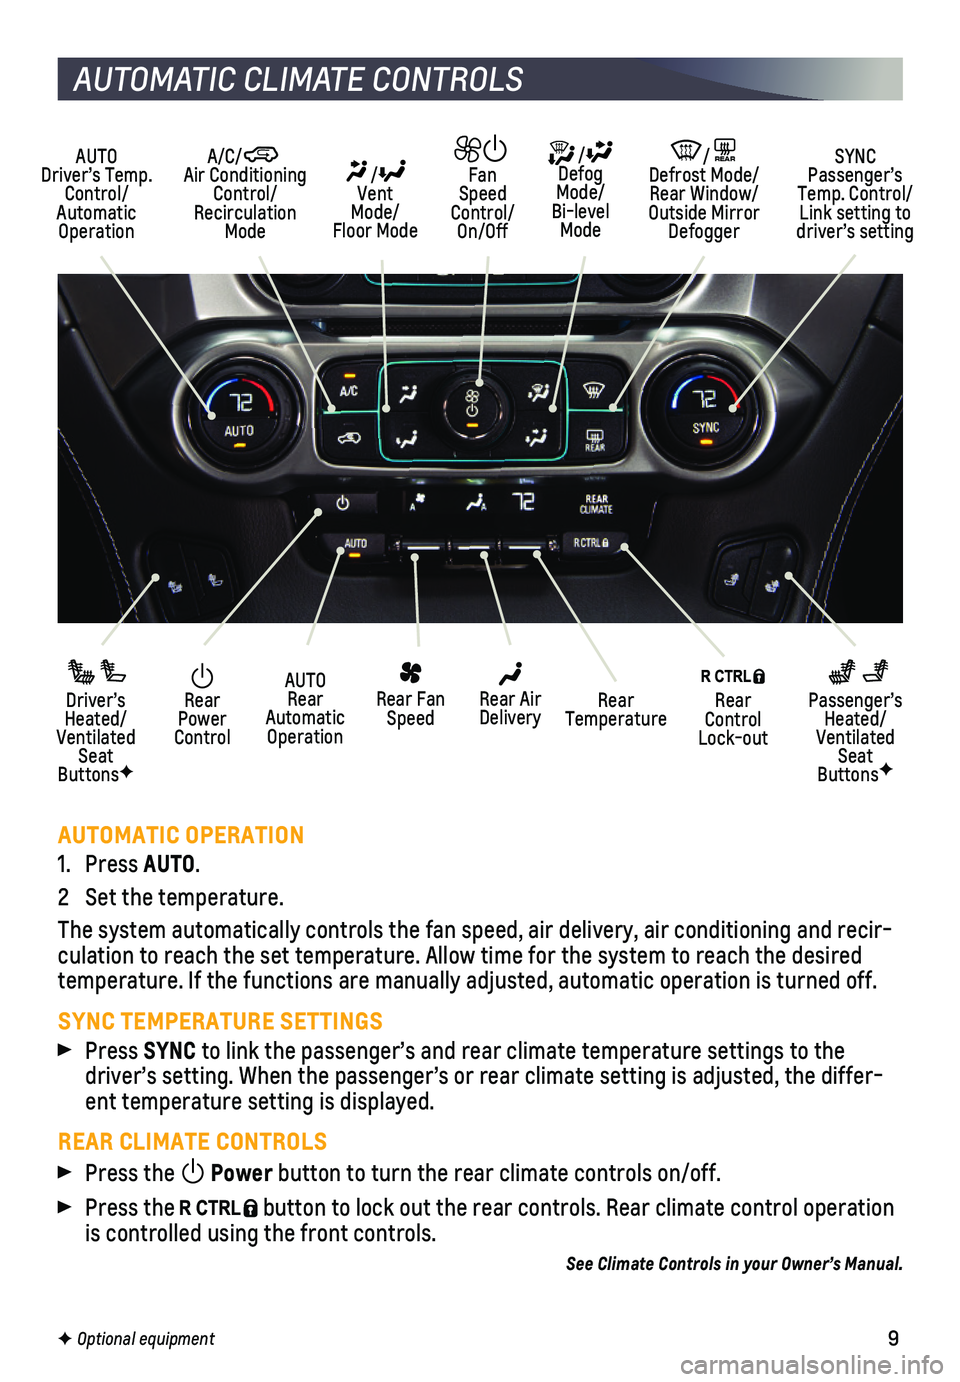 CHEVROLET SUBURBAN 2020  Get To Know Guide 9
HEAD-UP DISPLAY
AUTOMATIC OPERATION
1. Press AUTO.
2 Set the temperature. 
The system automatically controls the fan speed, air delivery, air condi\
tioning and recir-culation to reach the set tempe